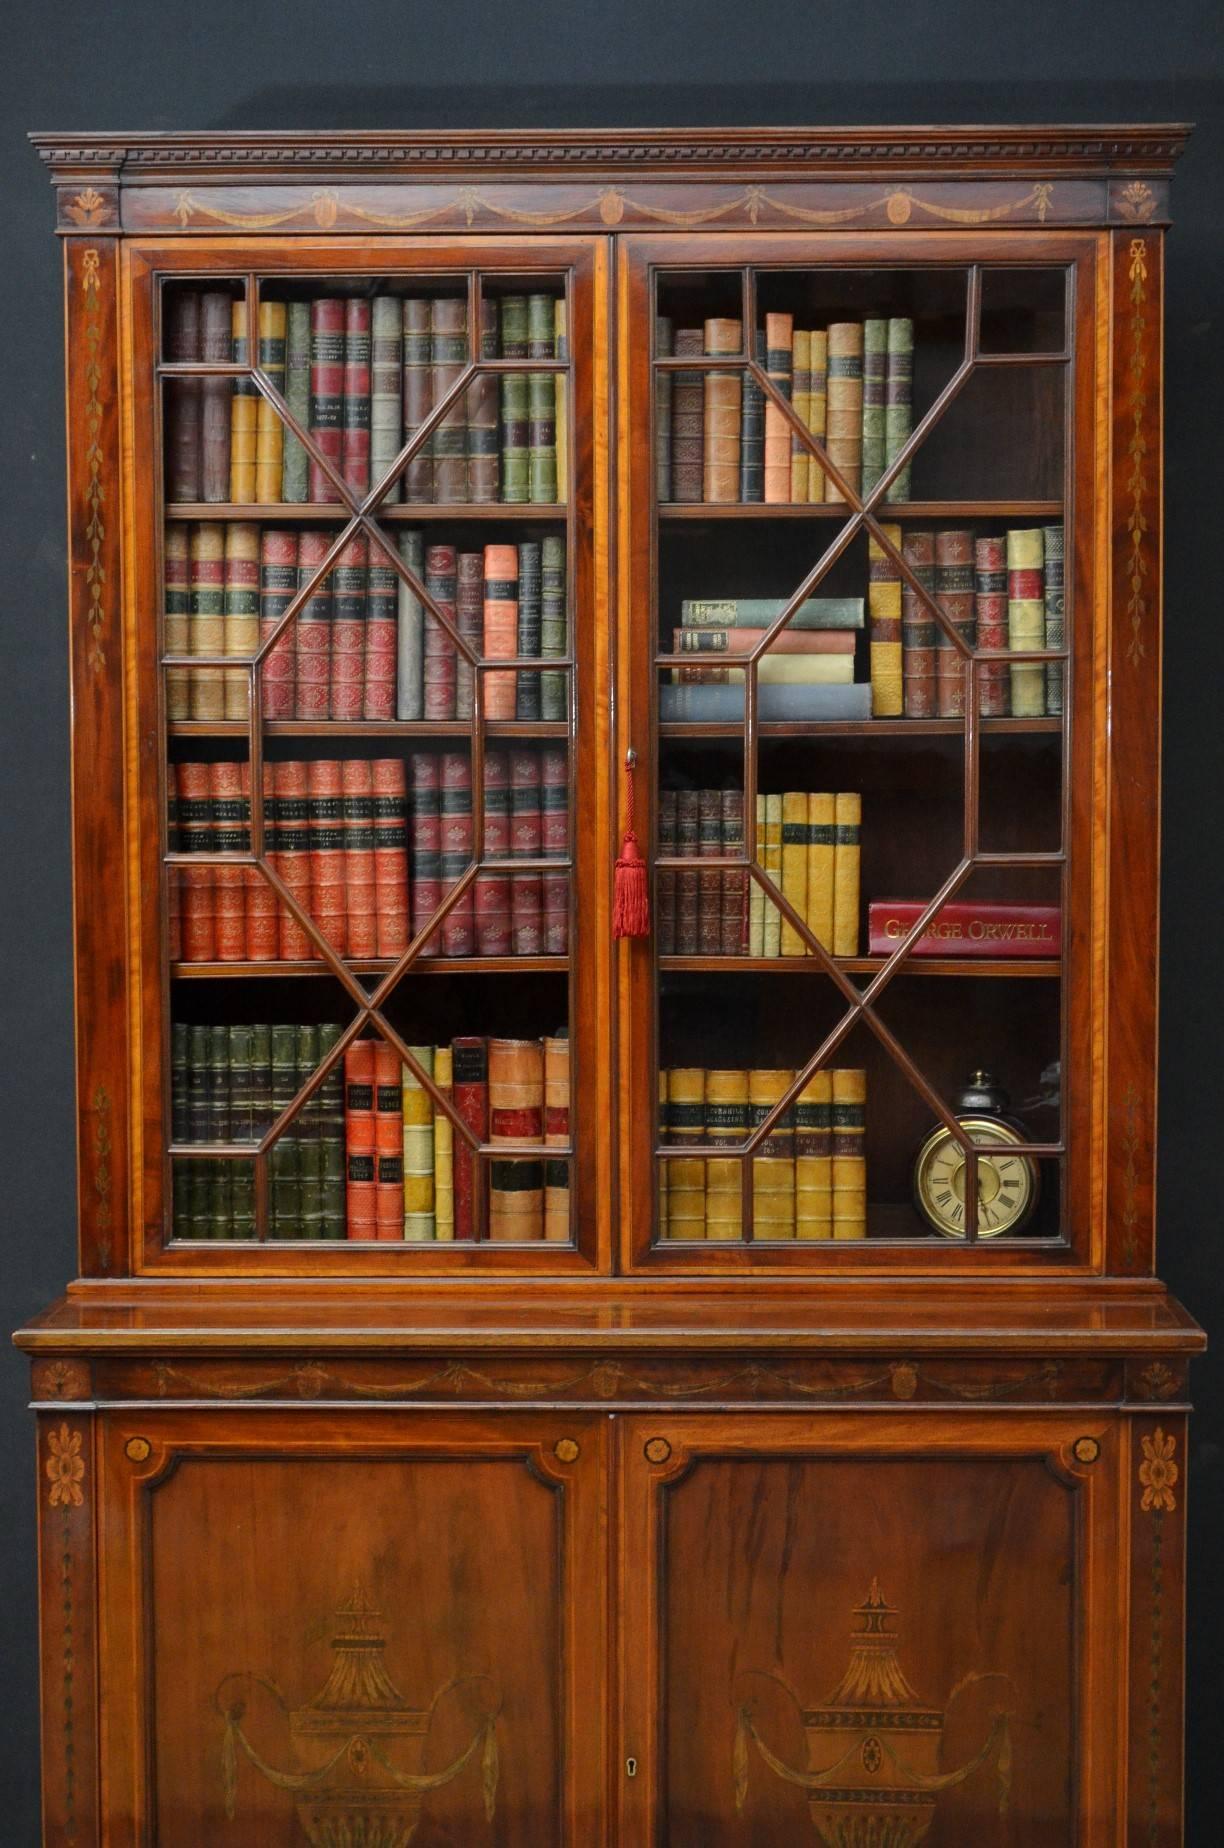 Sn4043 An attractive Edwardian bookcase in mahogany, having cavetto cornice with dentil carving and finely inlaid frieze above astragal glazed doors enclosing three height adjustable shelves, all flanked by floral inlays, base having pair of